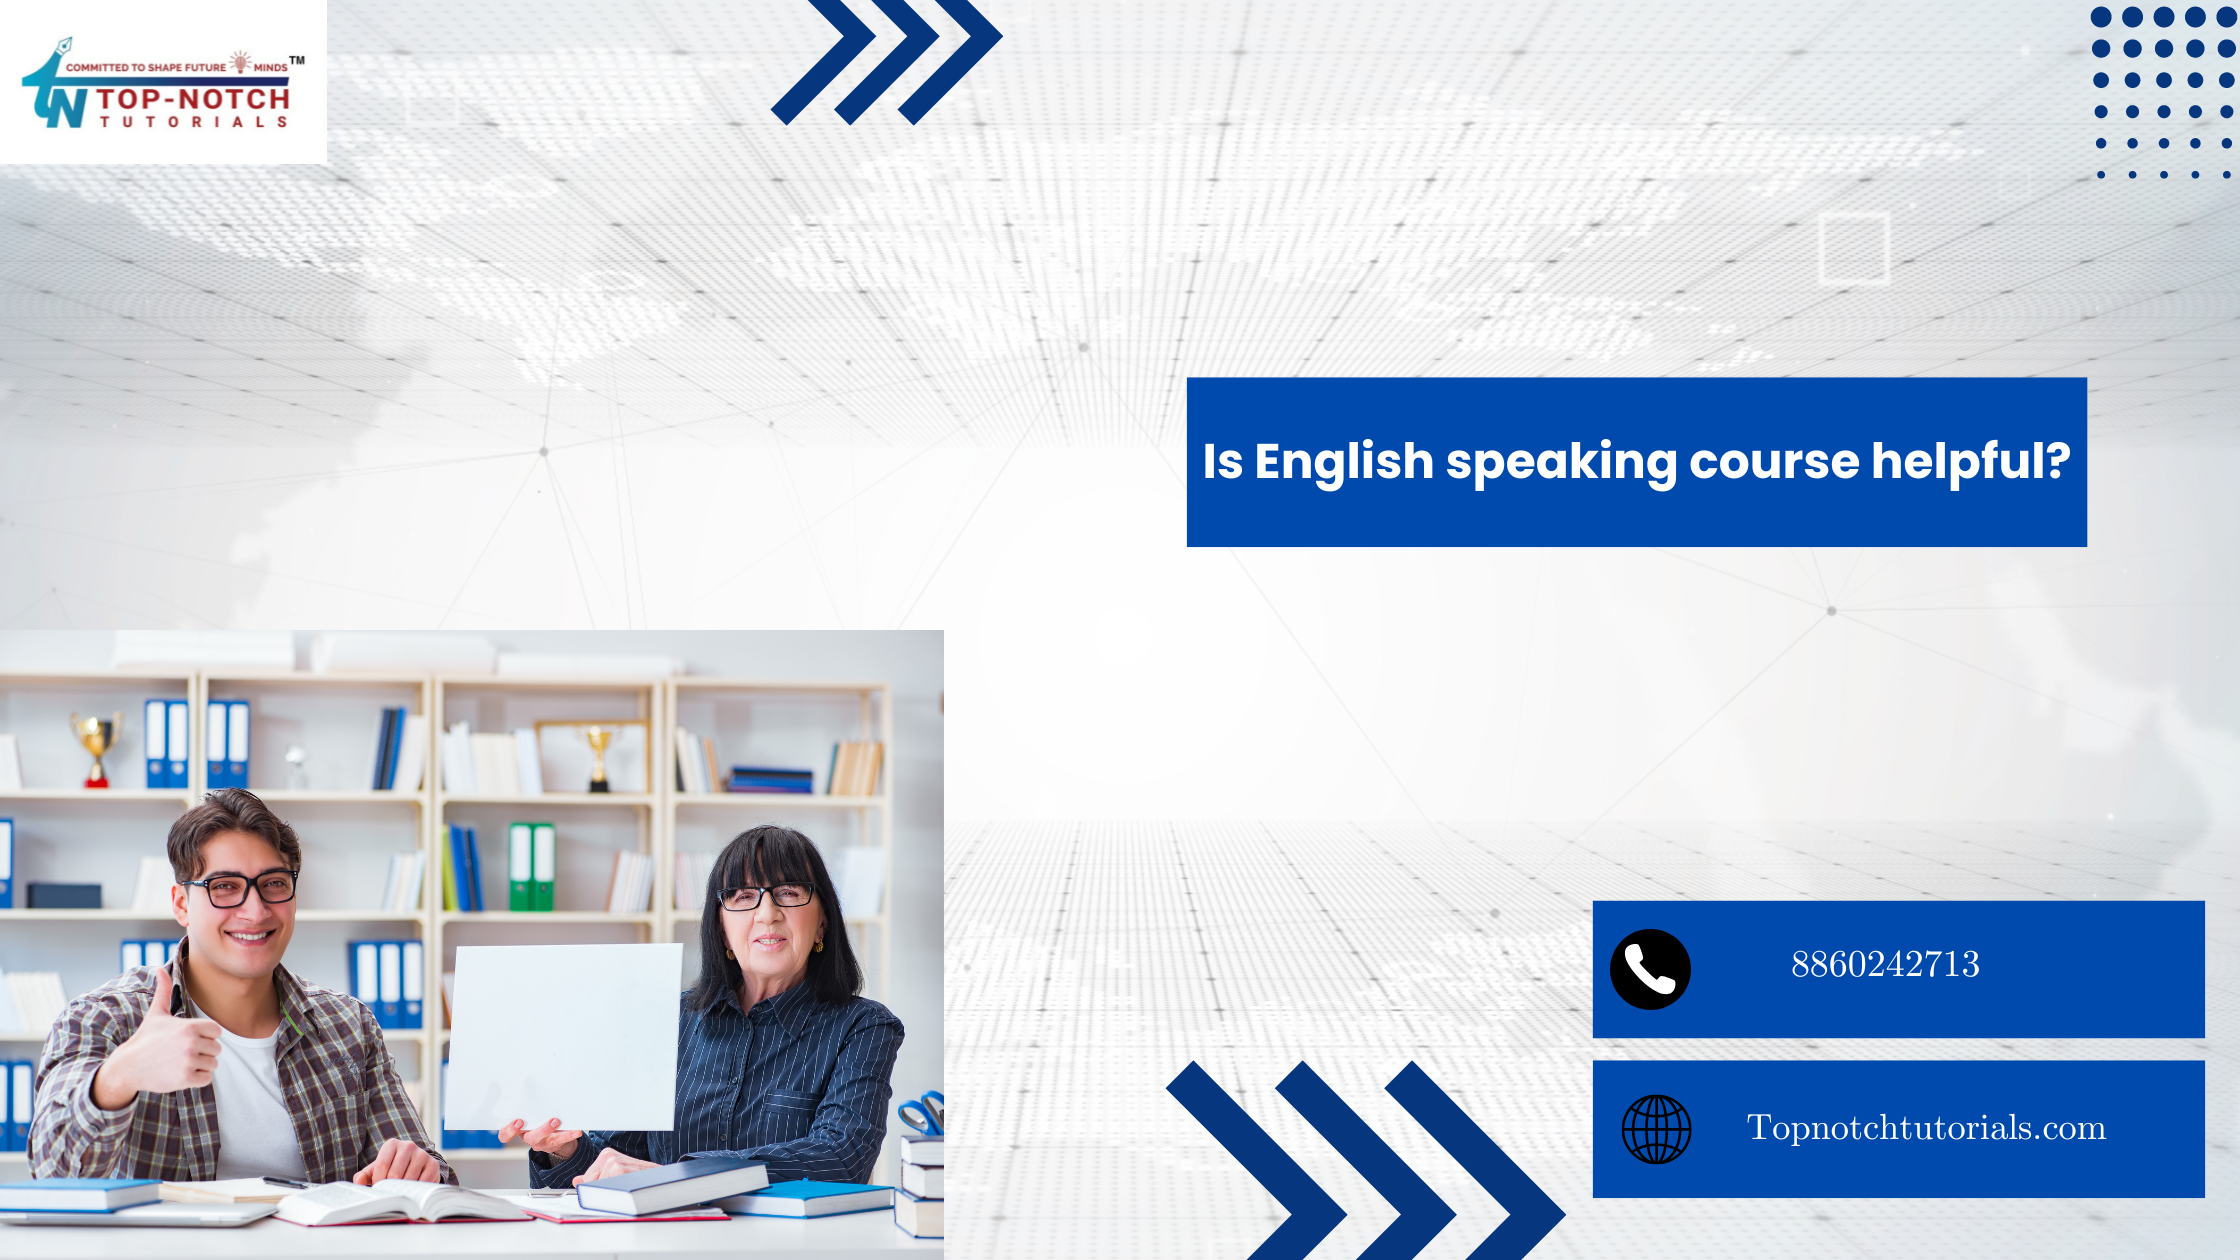 Is English speaking course helpful?